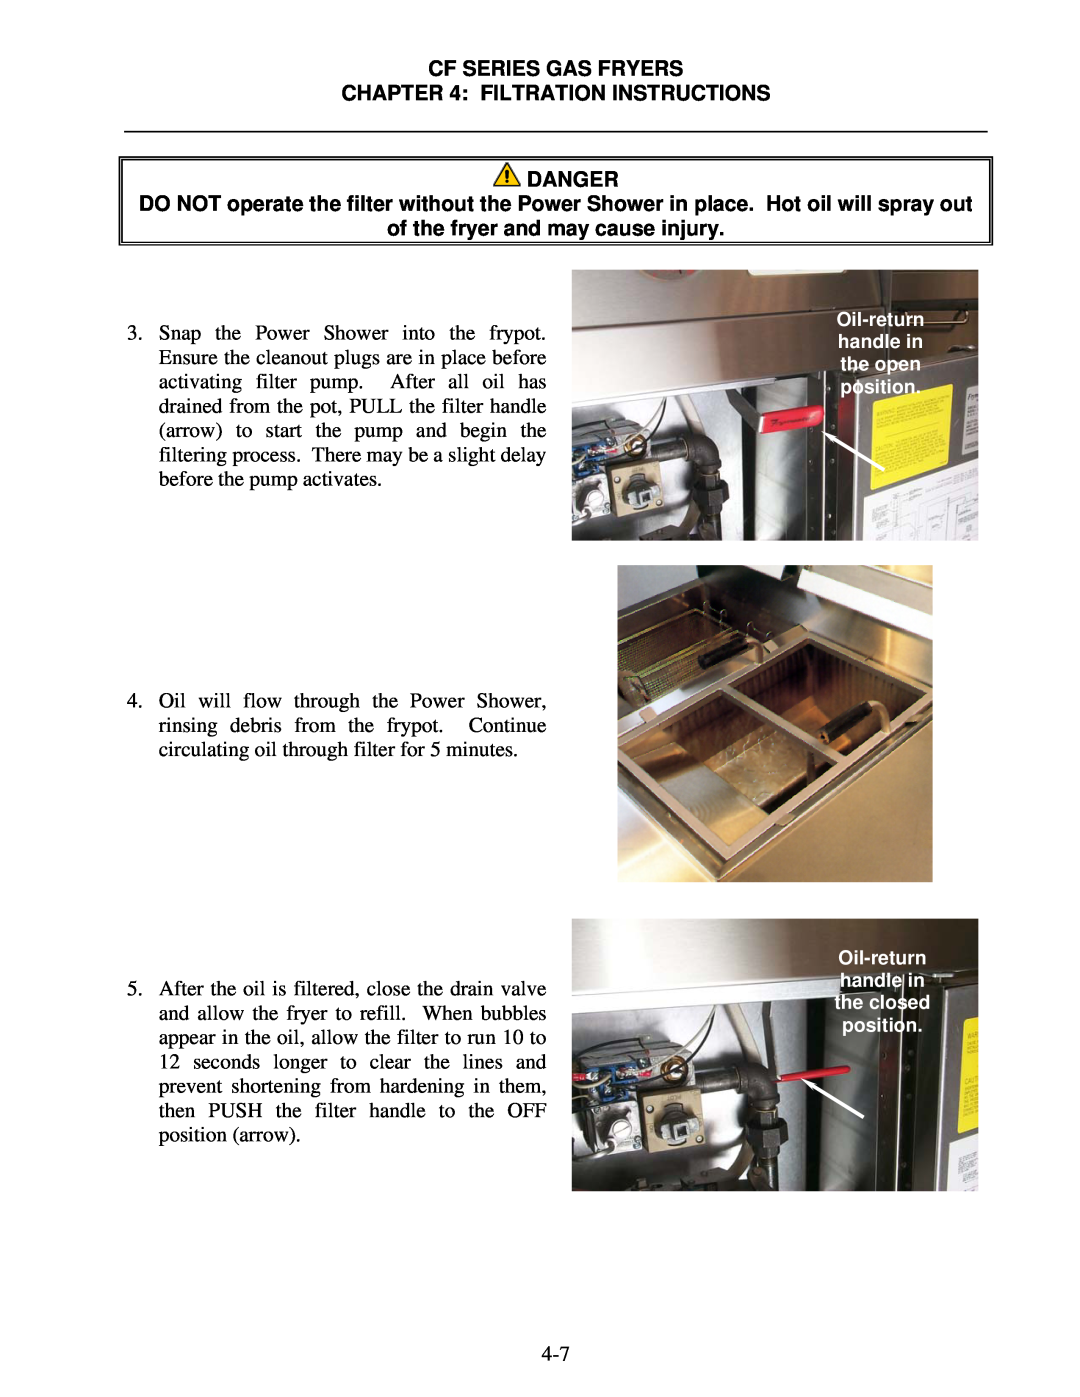 Frymaster FMCF operation manual Cf Series Gas Fryers Filtration Instructions Danger, of the fryer and may cause injury 